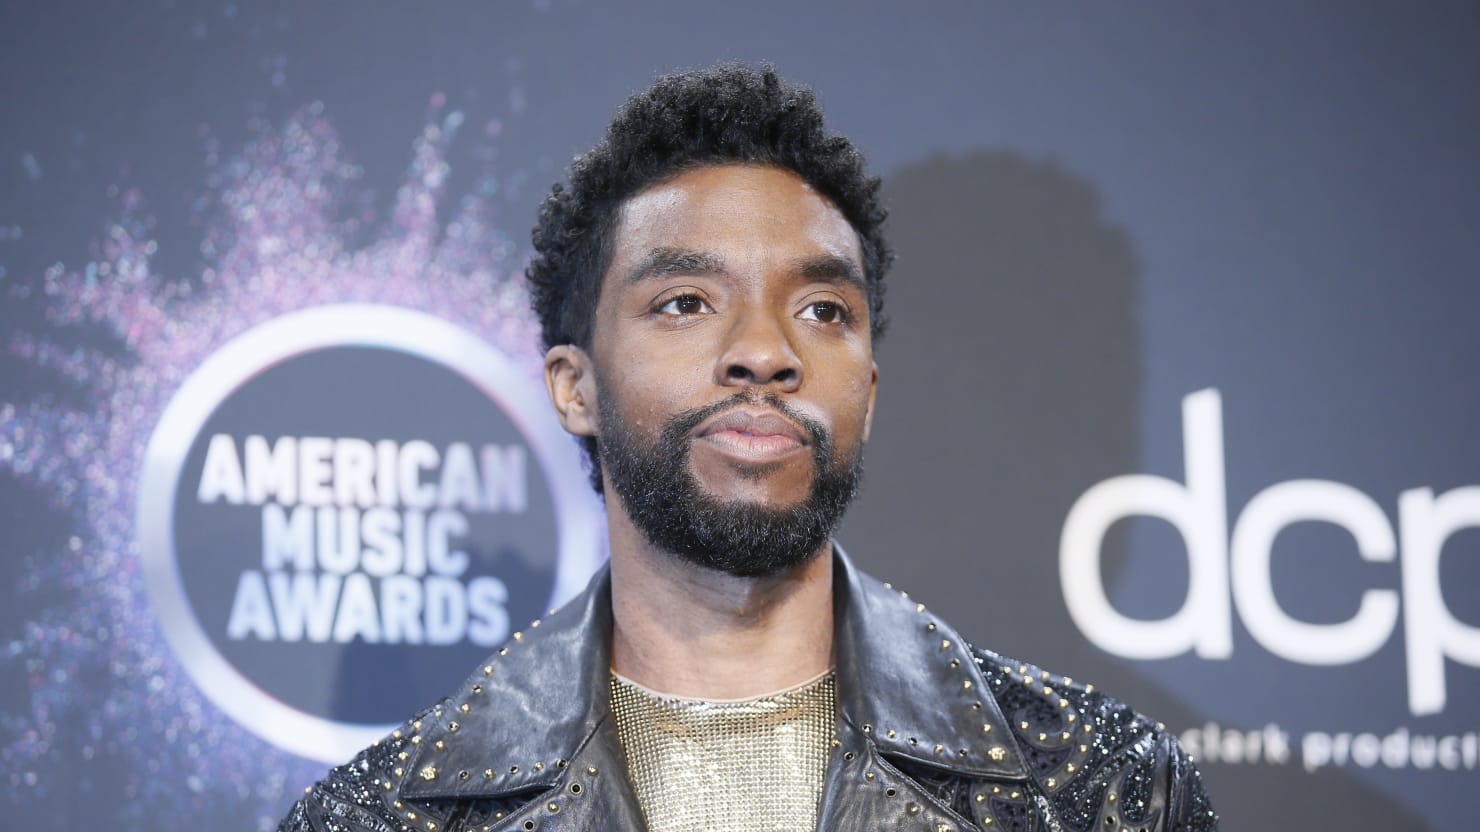 ‘black Panther’ Star Chadwick Boseman Dies At 43 After Quietly Battling